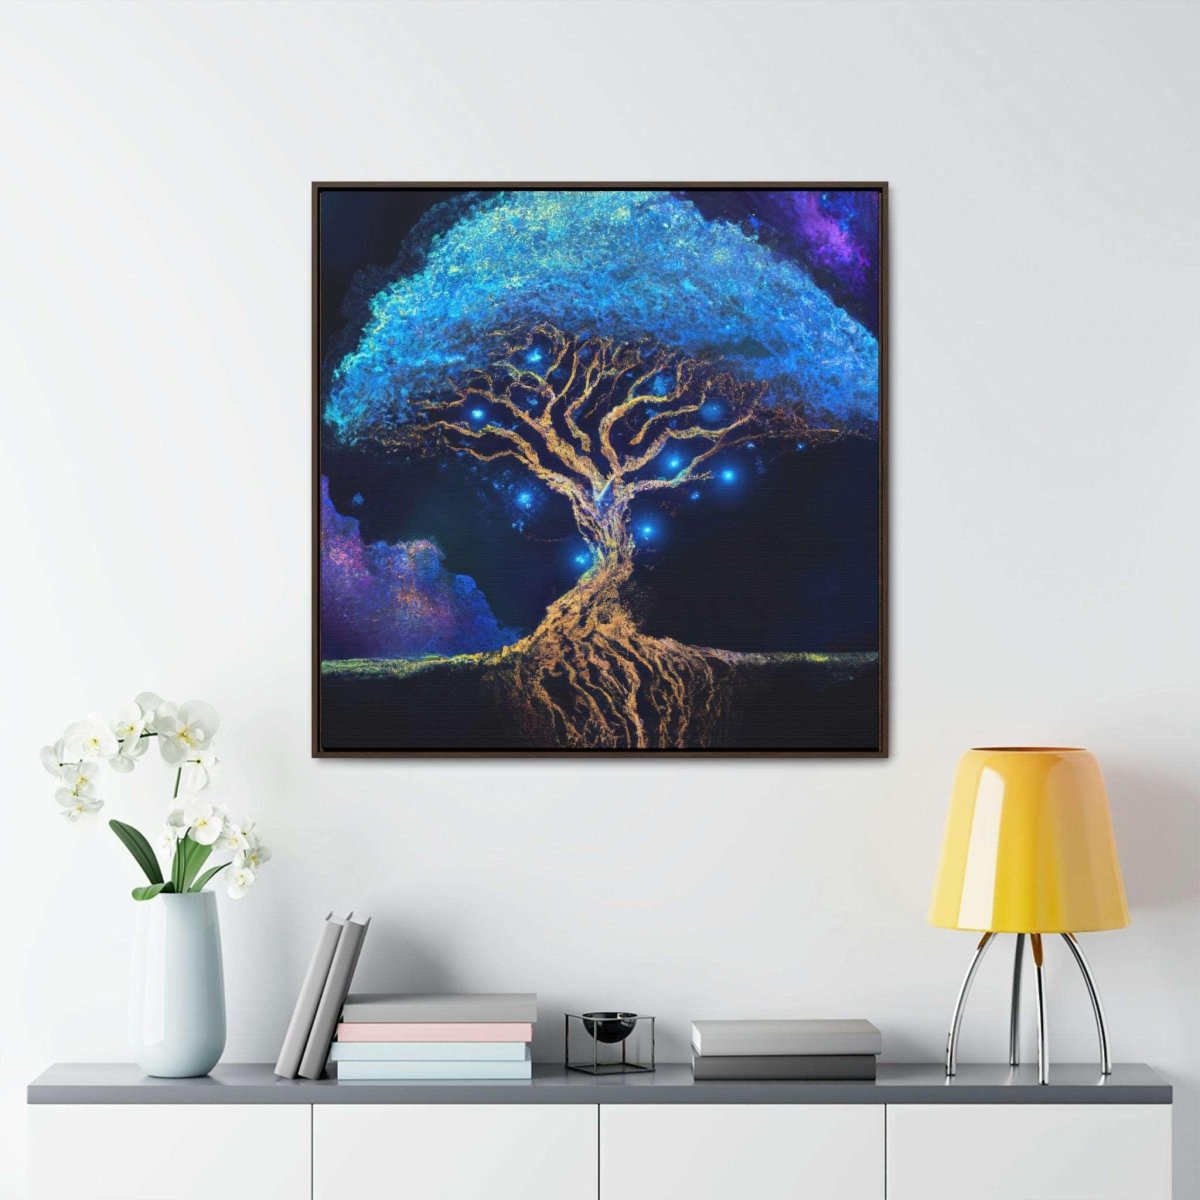 Abstract Tree of Life Blue Night Sky Painting - Framed Digital Art - HigherFrequencies